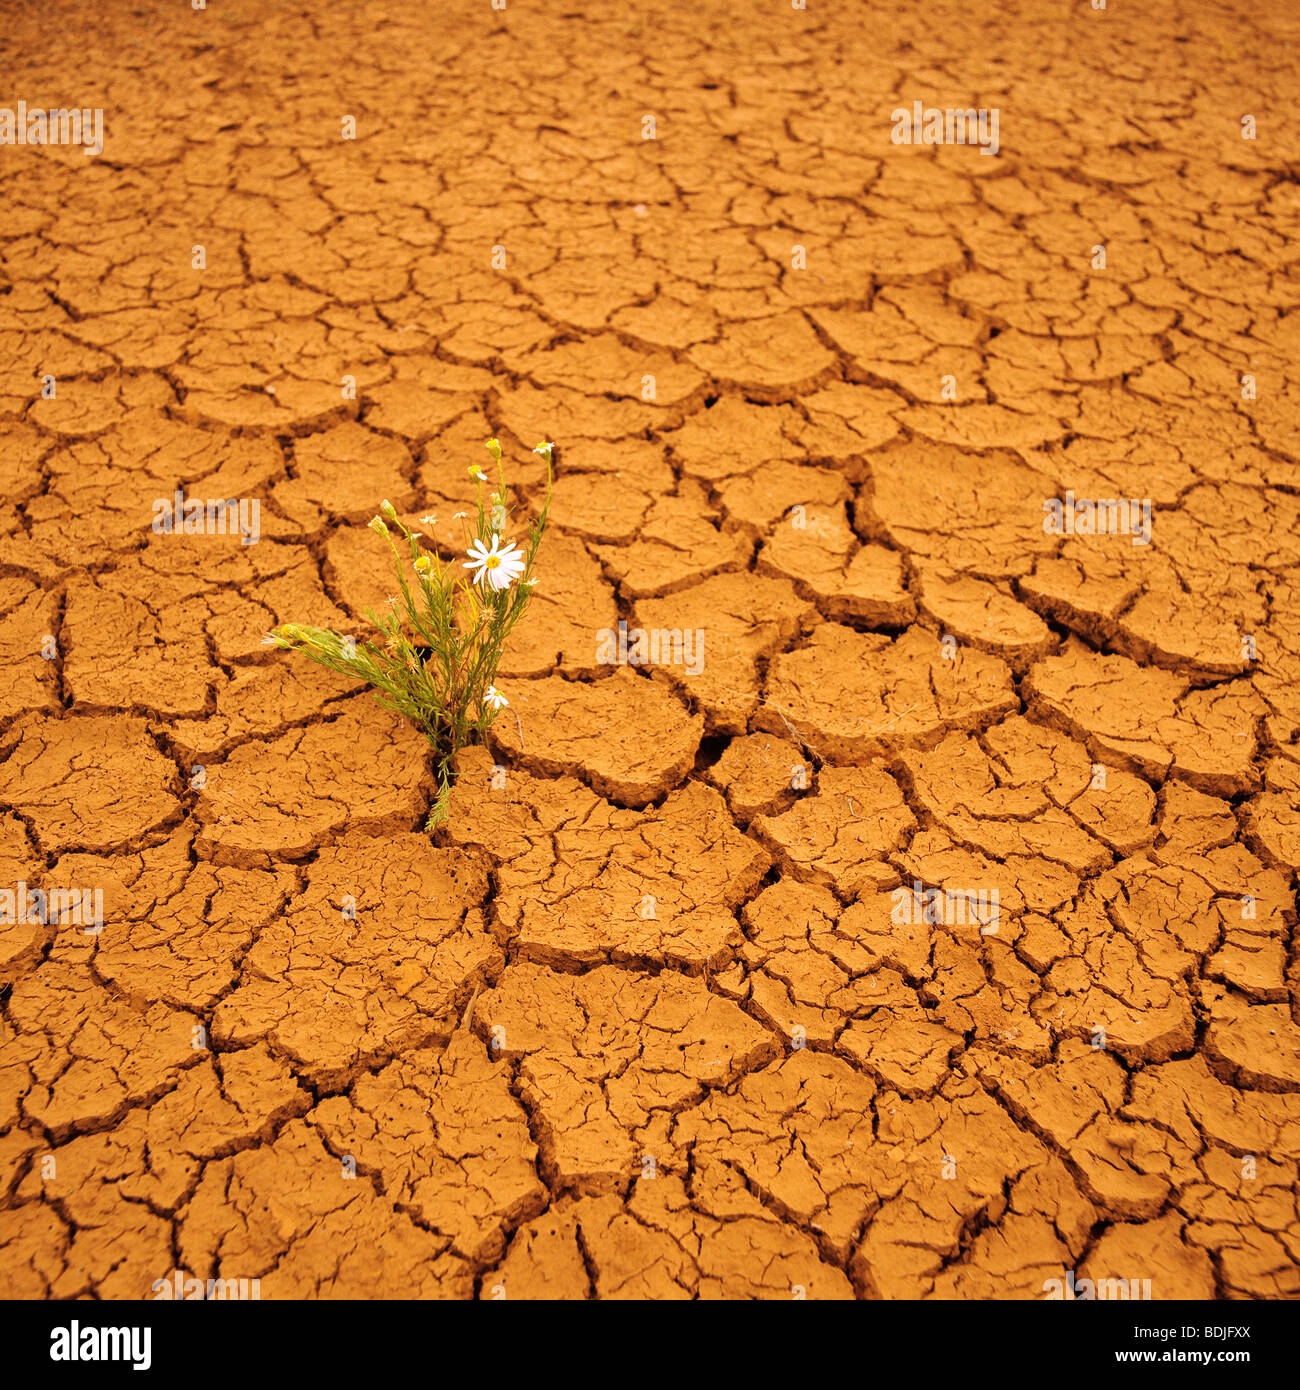 Wildflower Growing in Arid Cracked Earth Stock Photo